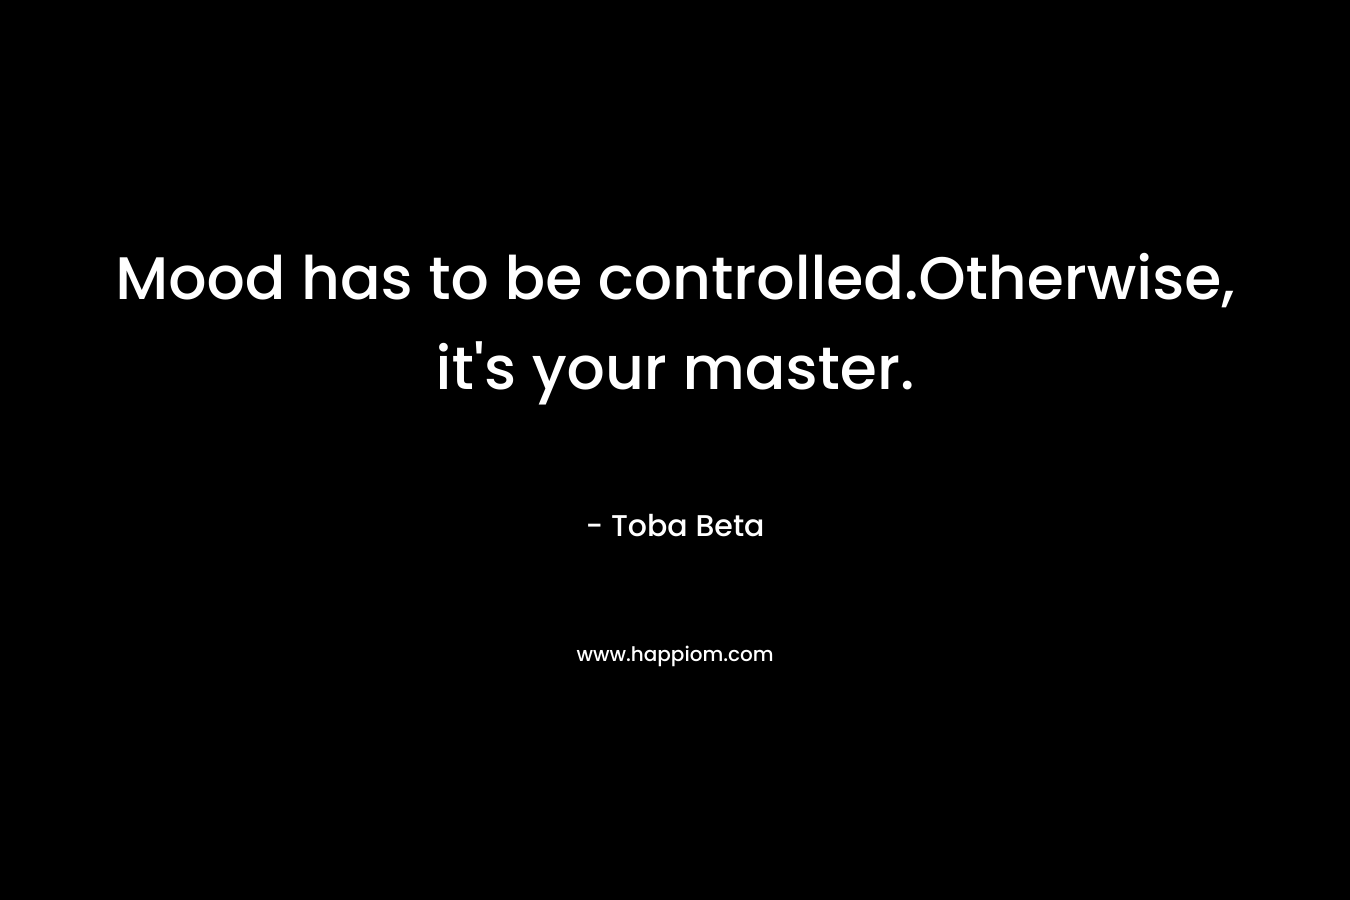 Mood has to be controlled.Otherwise, it’s your master. – Toba Beta